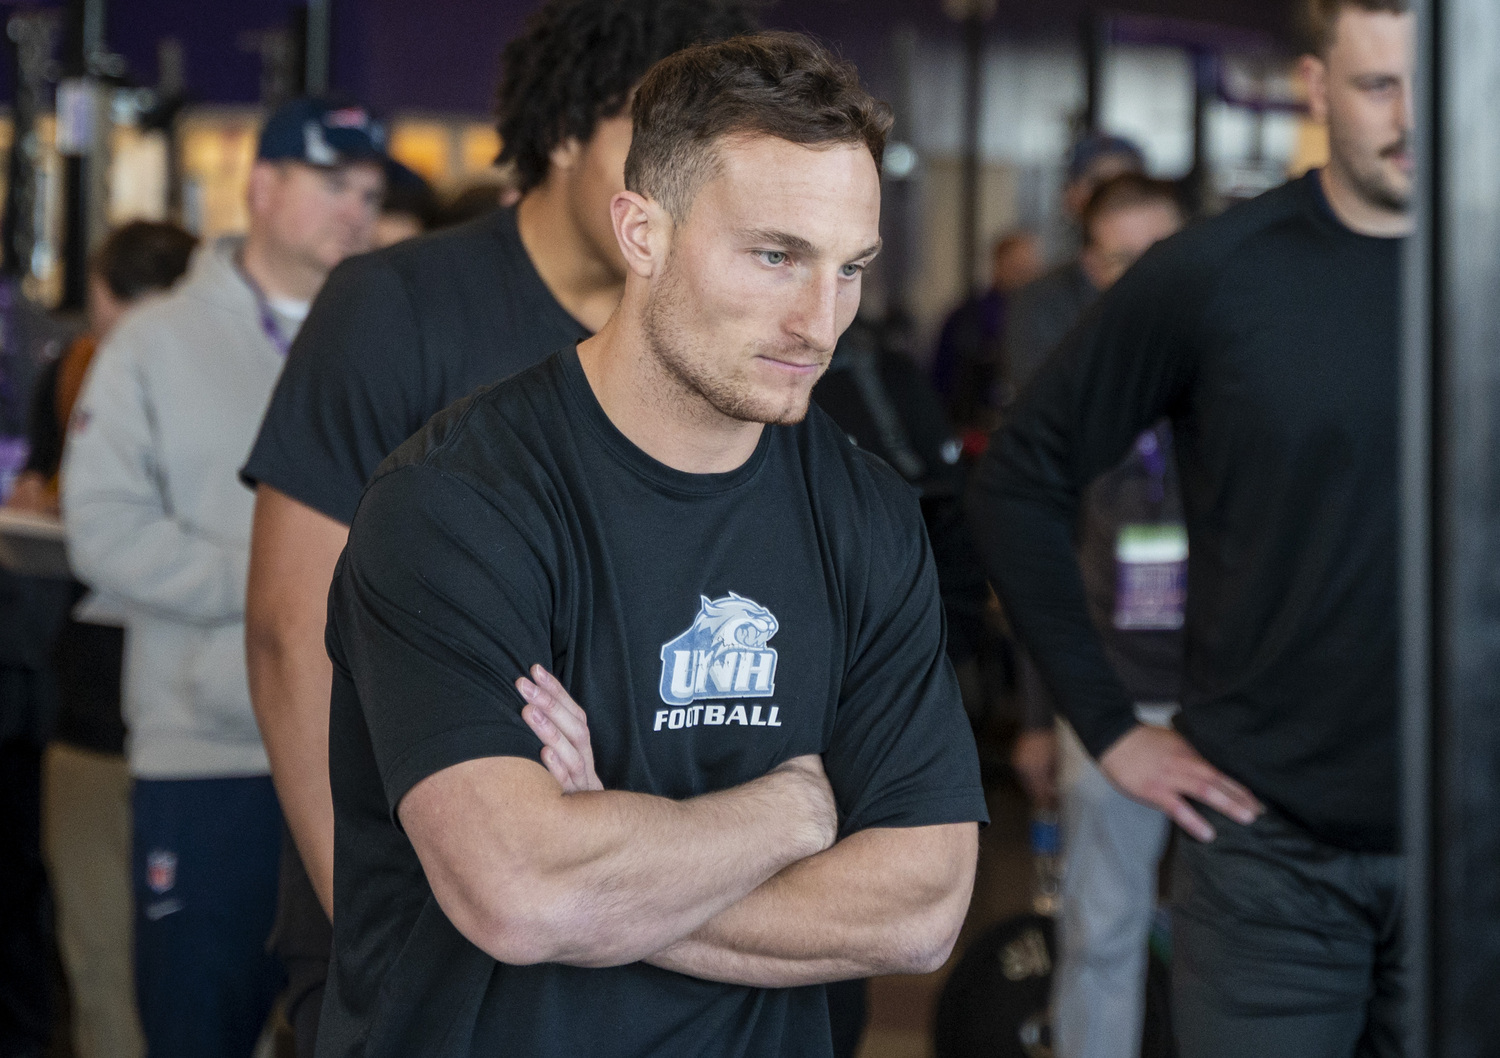 Westhampton Beach and soon-to-be University of New Hampshire graduate Dylan Laube during College of the Holy Cross's annual NFL Pro Day March 21. UNH Athletics/Patrick Donnelly